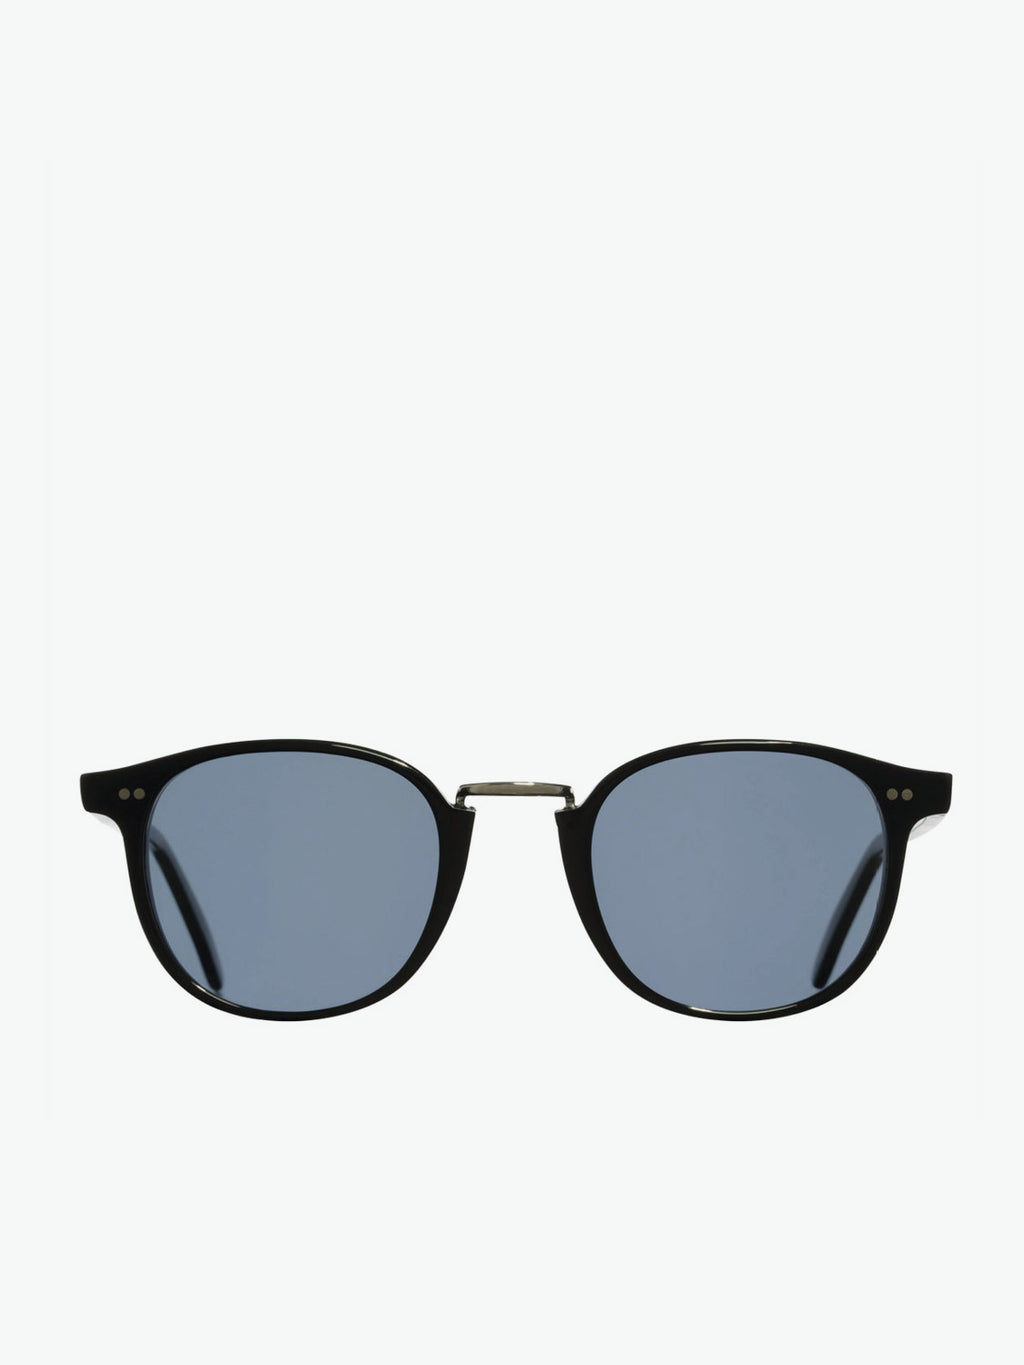 Cutler and Gross Round-Frame Black Acetate Sunglasses | A